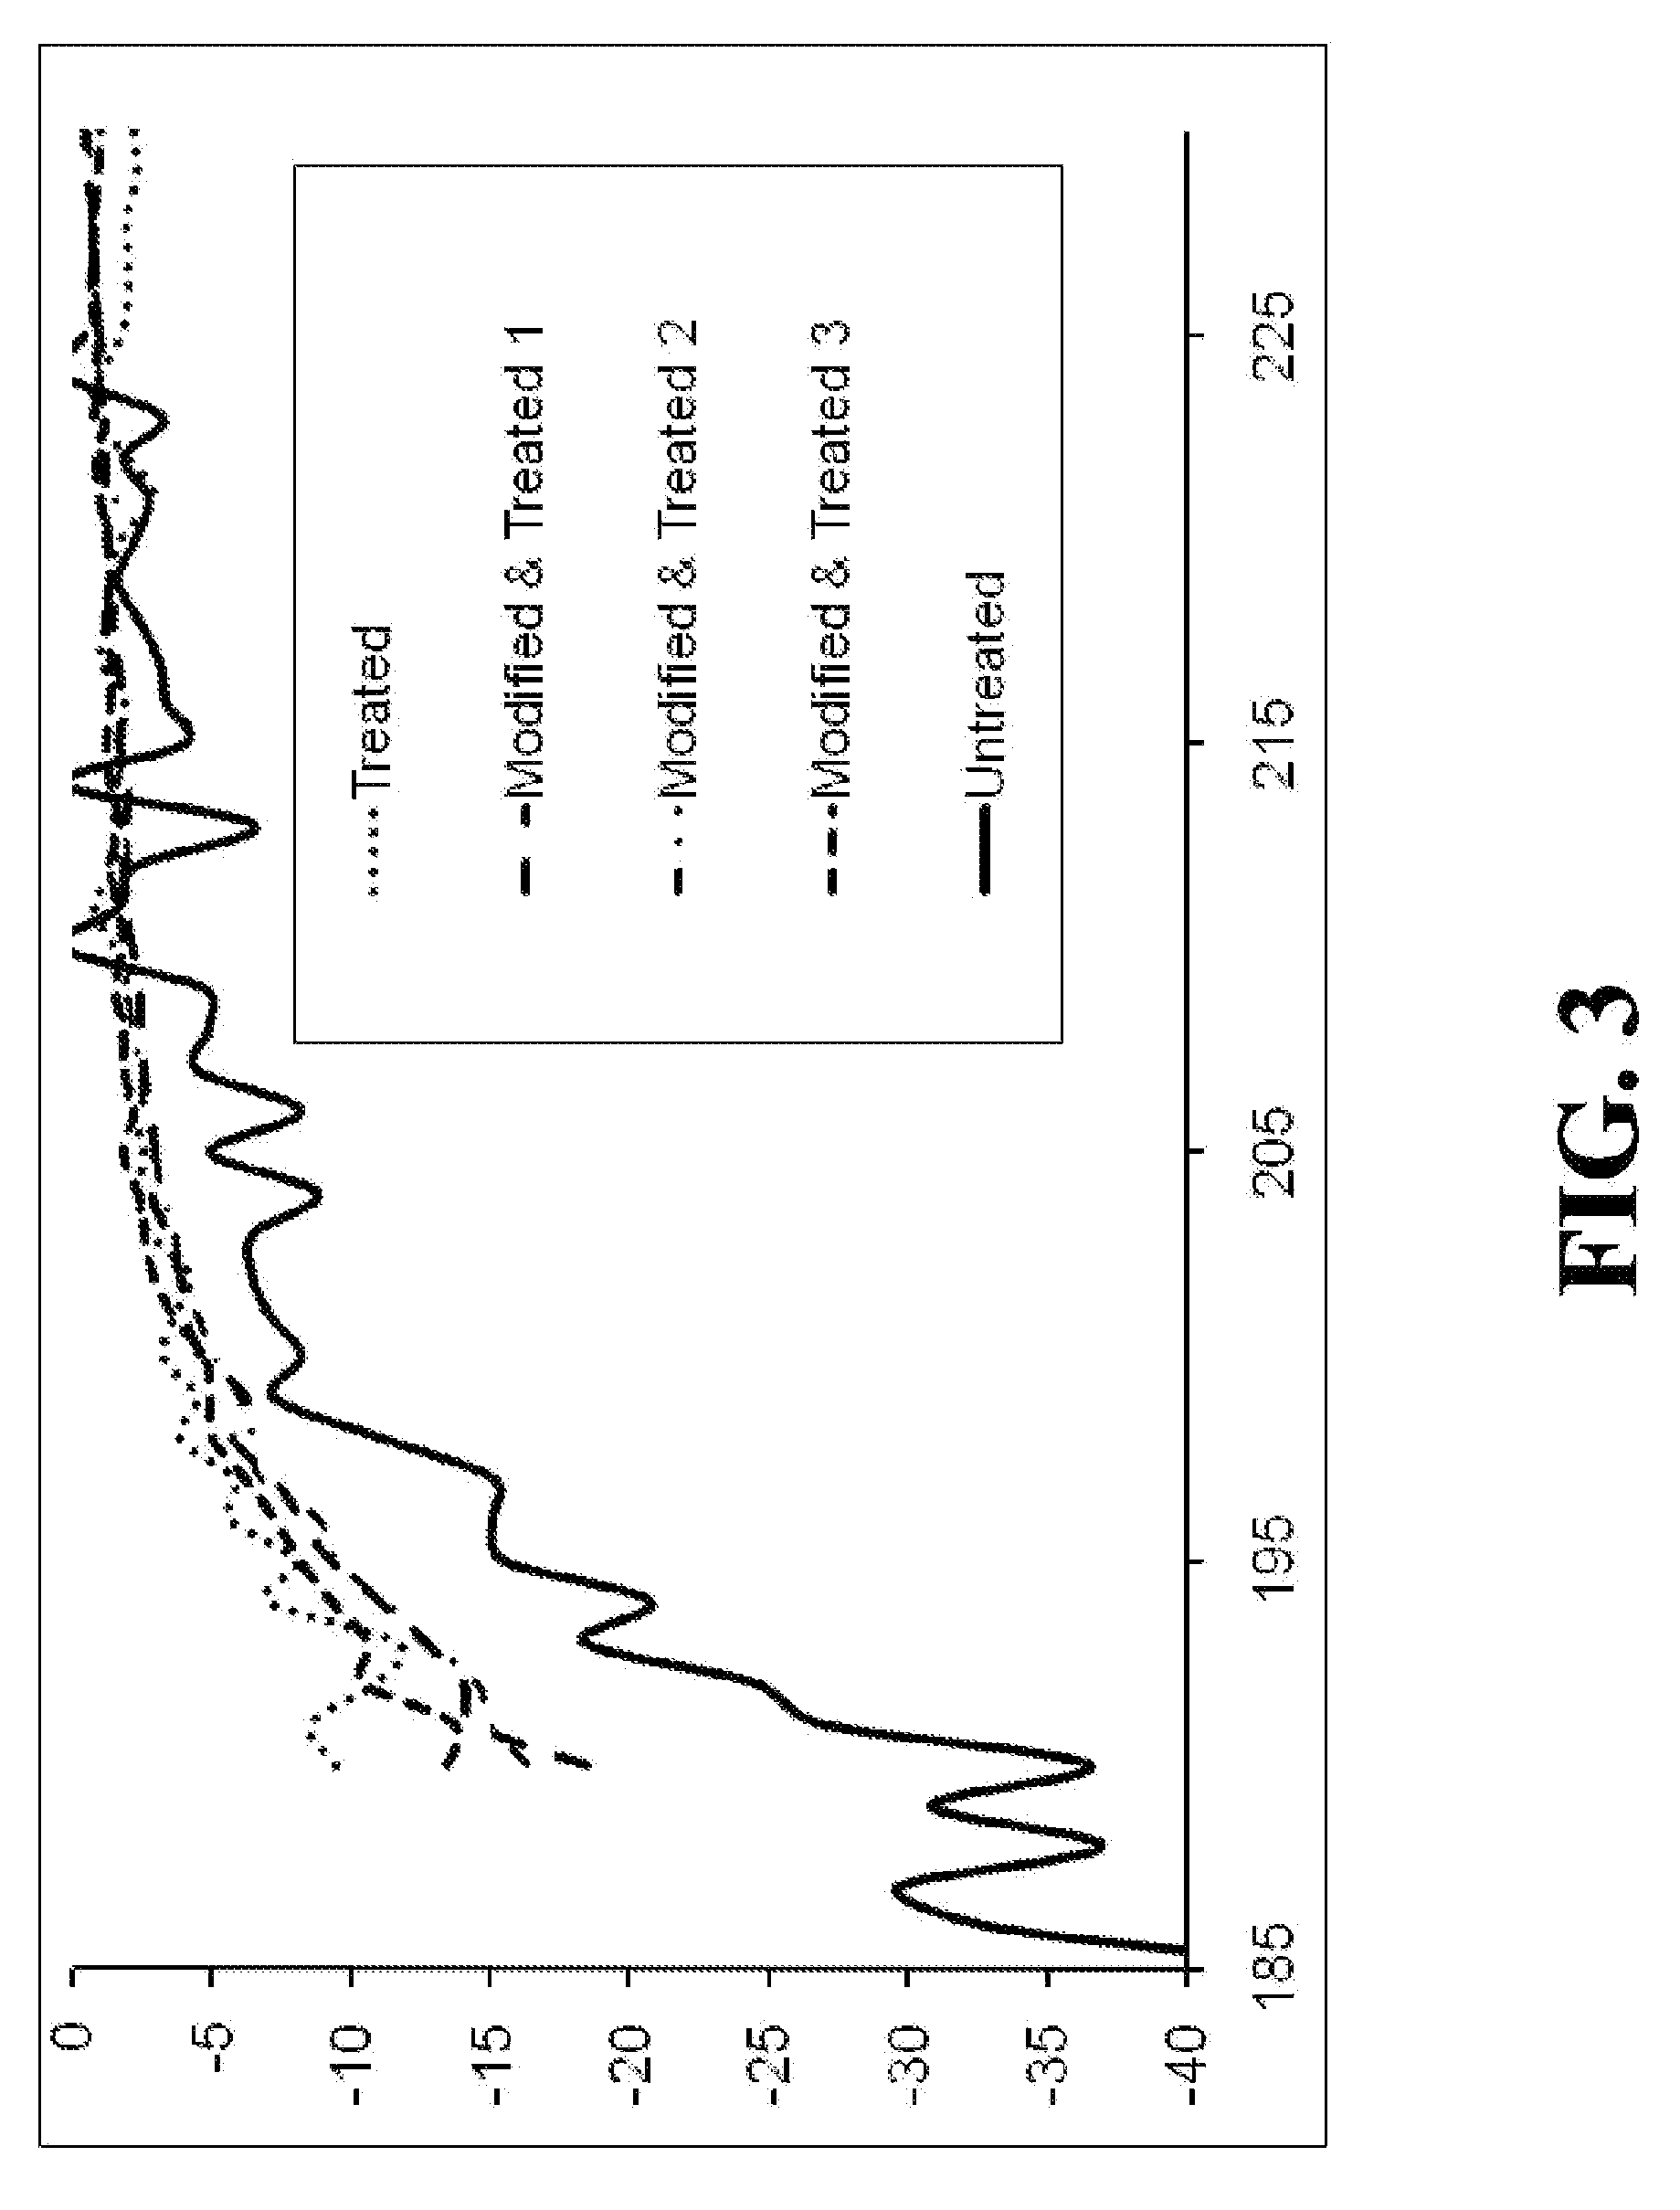 Novel biomaterials and a method for making and using same